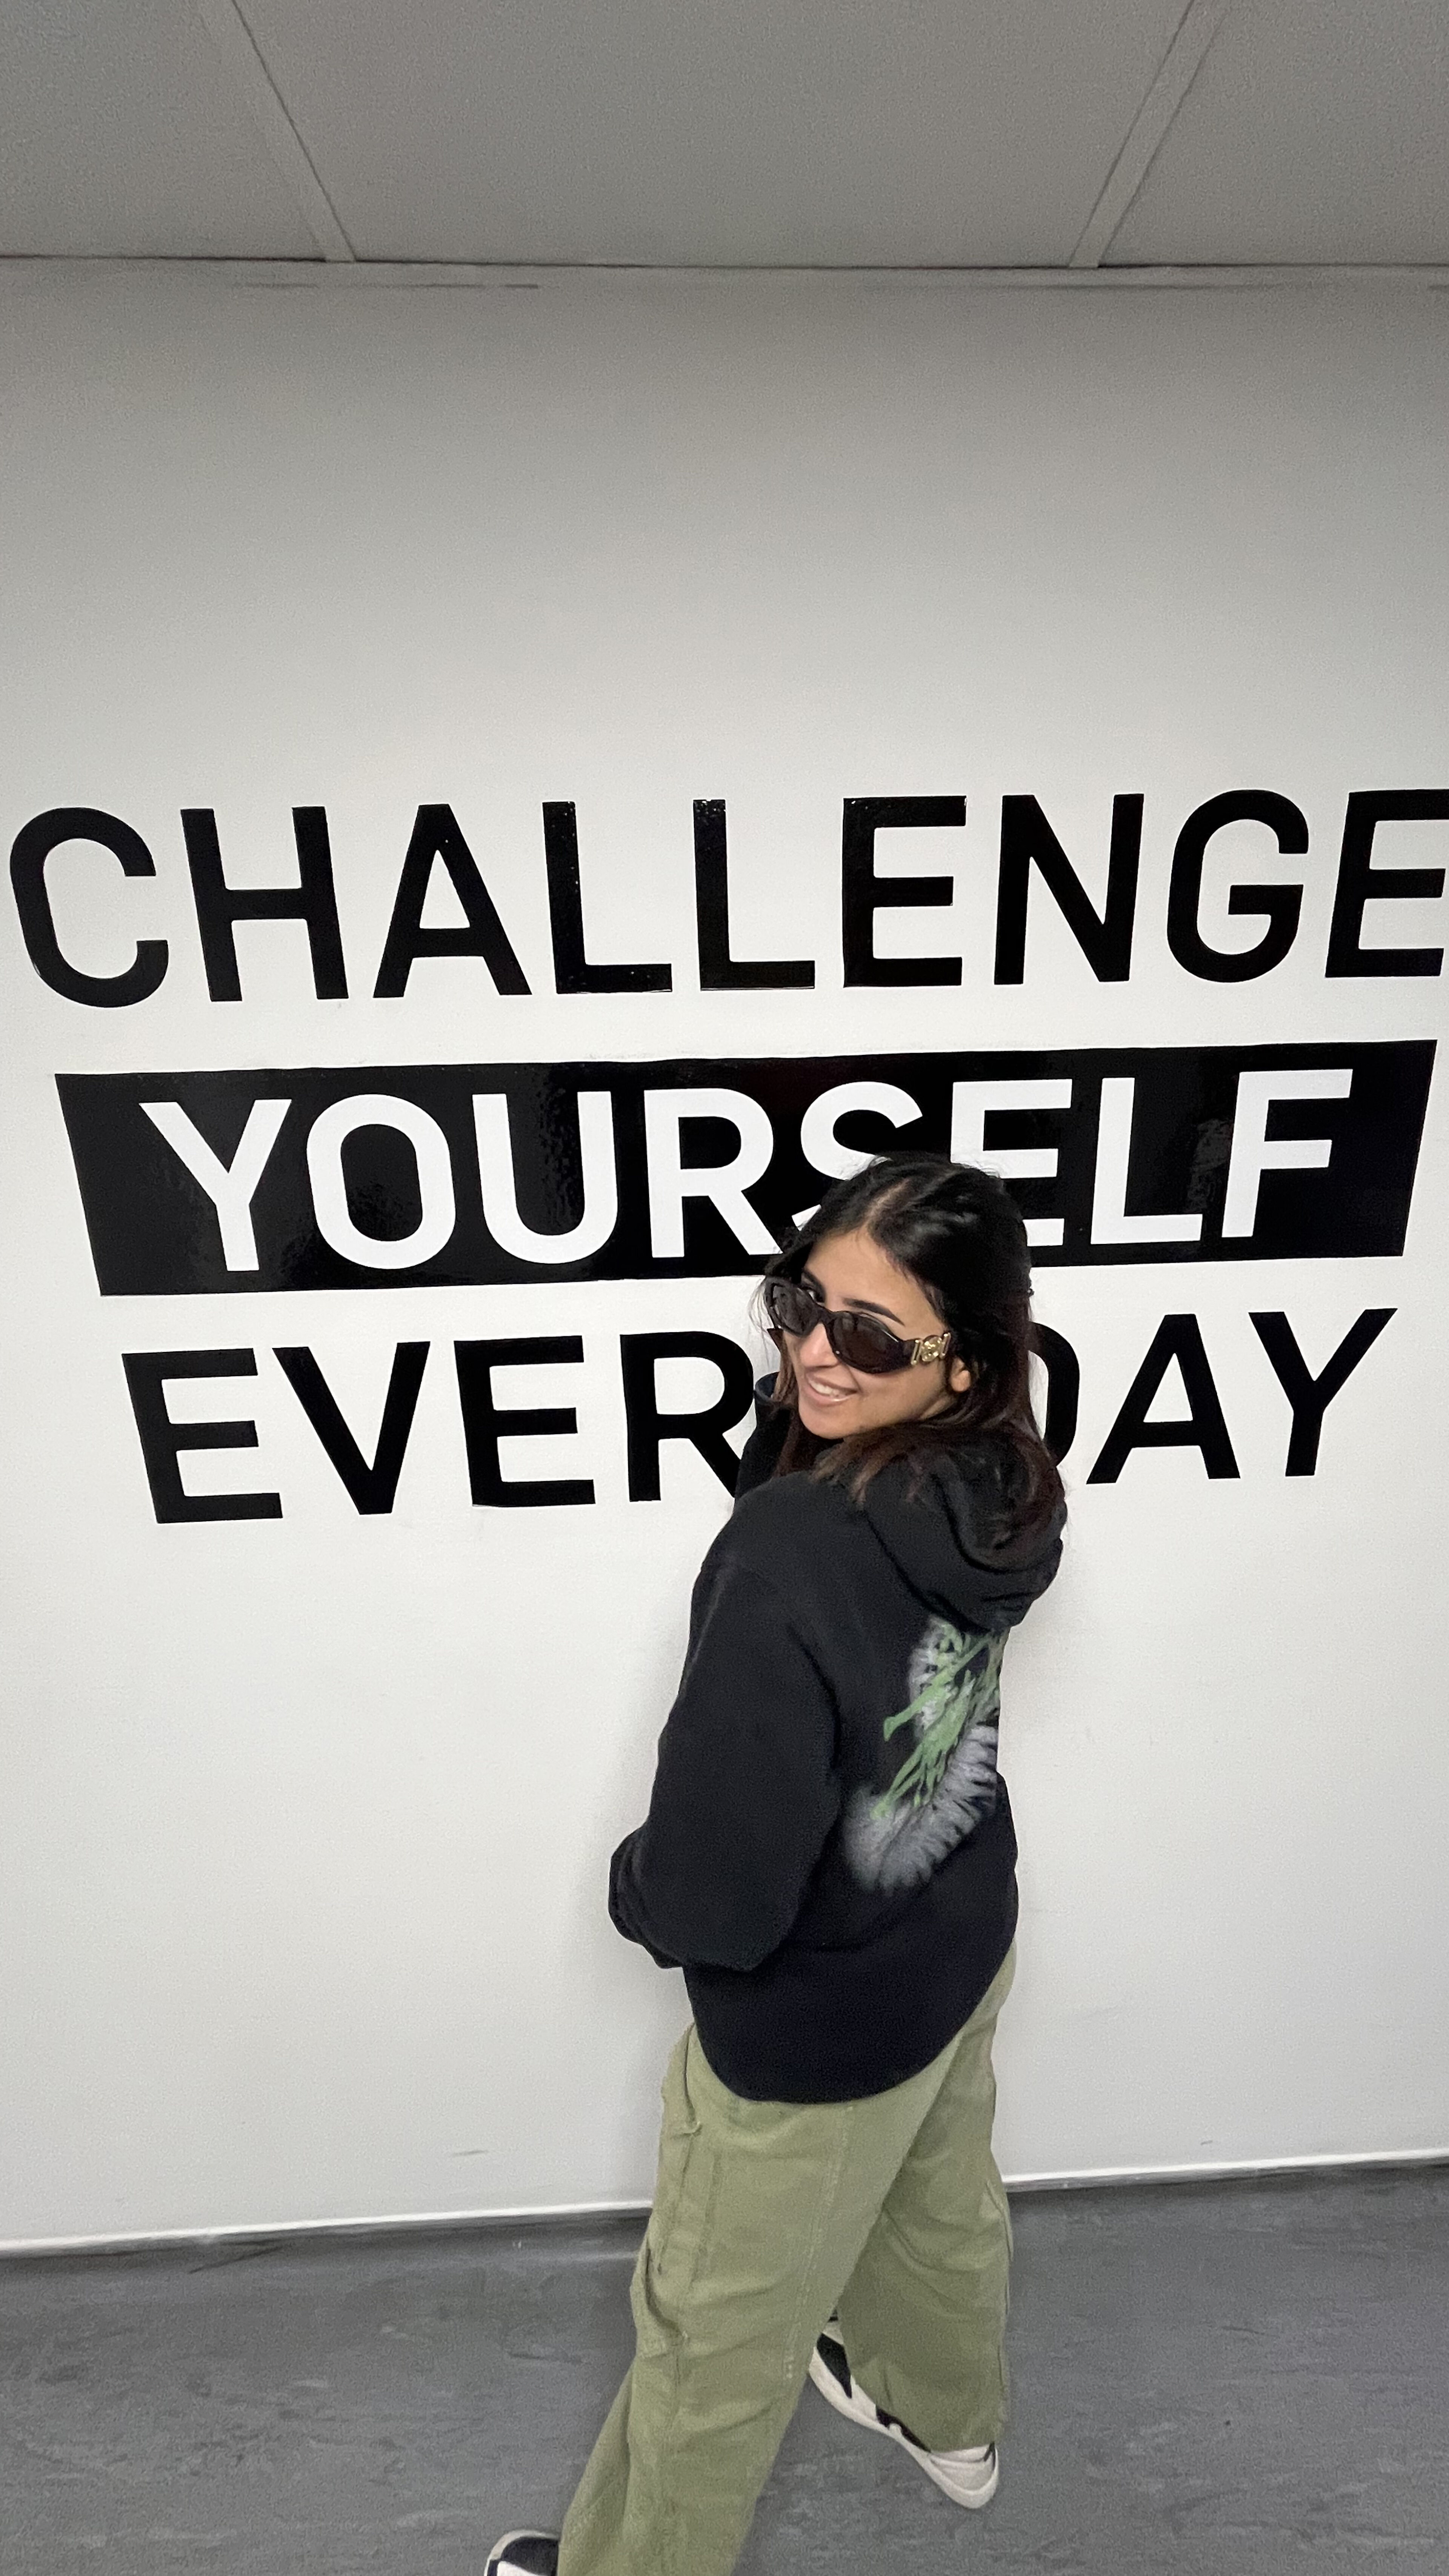 A person poses playfully in front of a wall with the motivational message "CHALLENGE YOURSELF EVERYDAY" in bold letters.